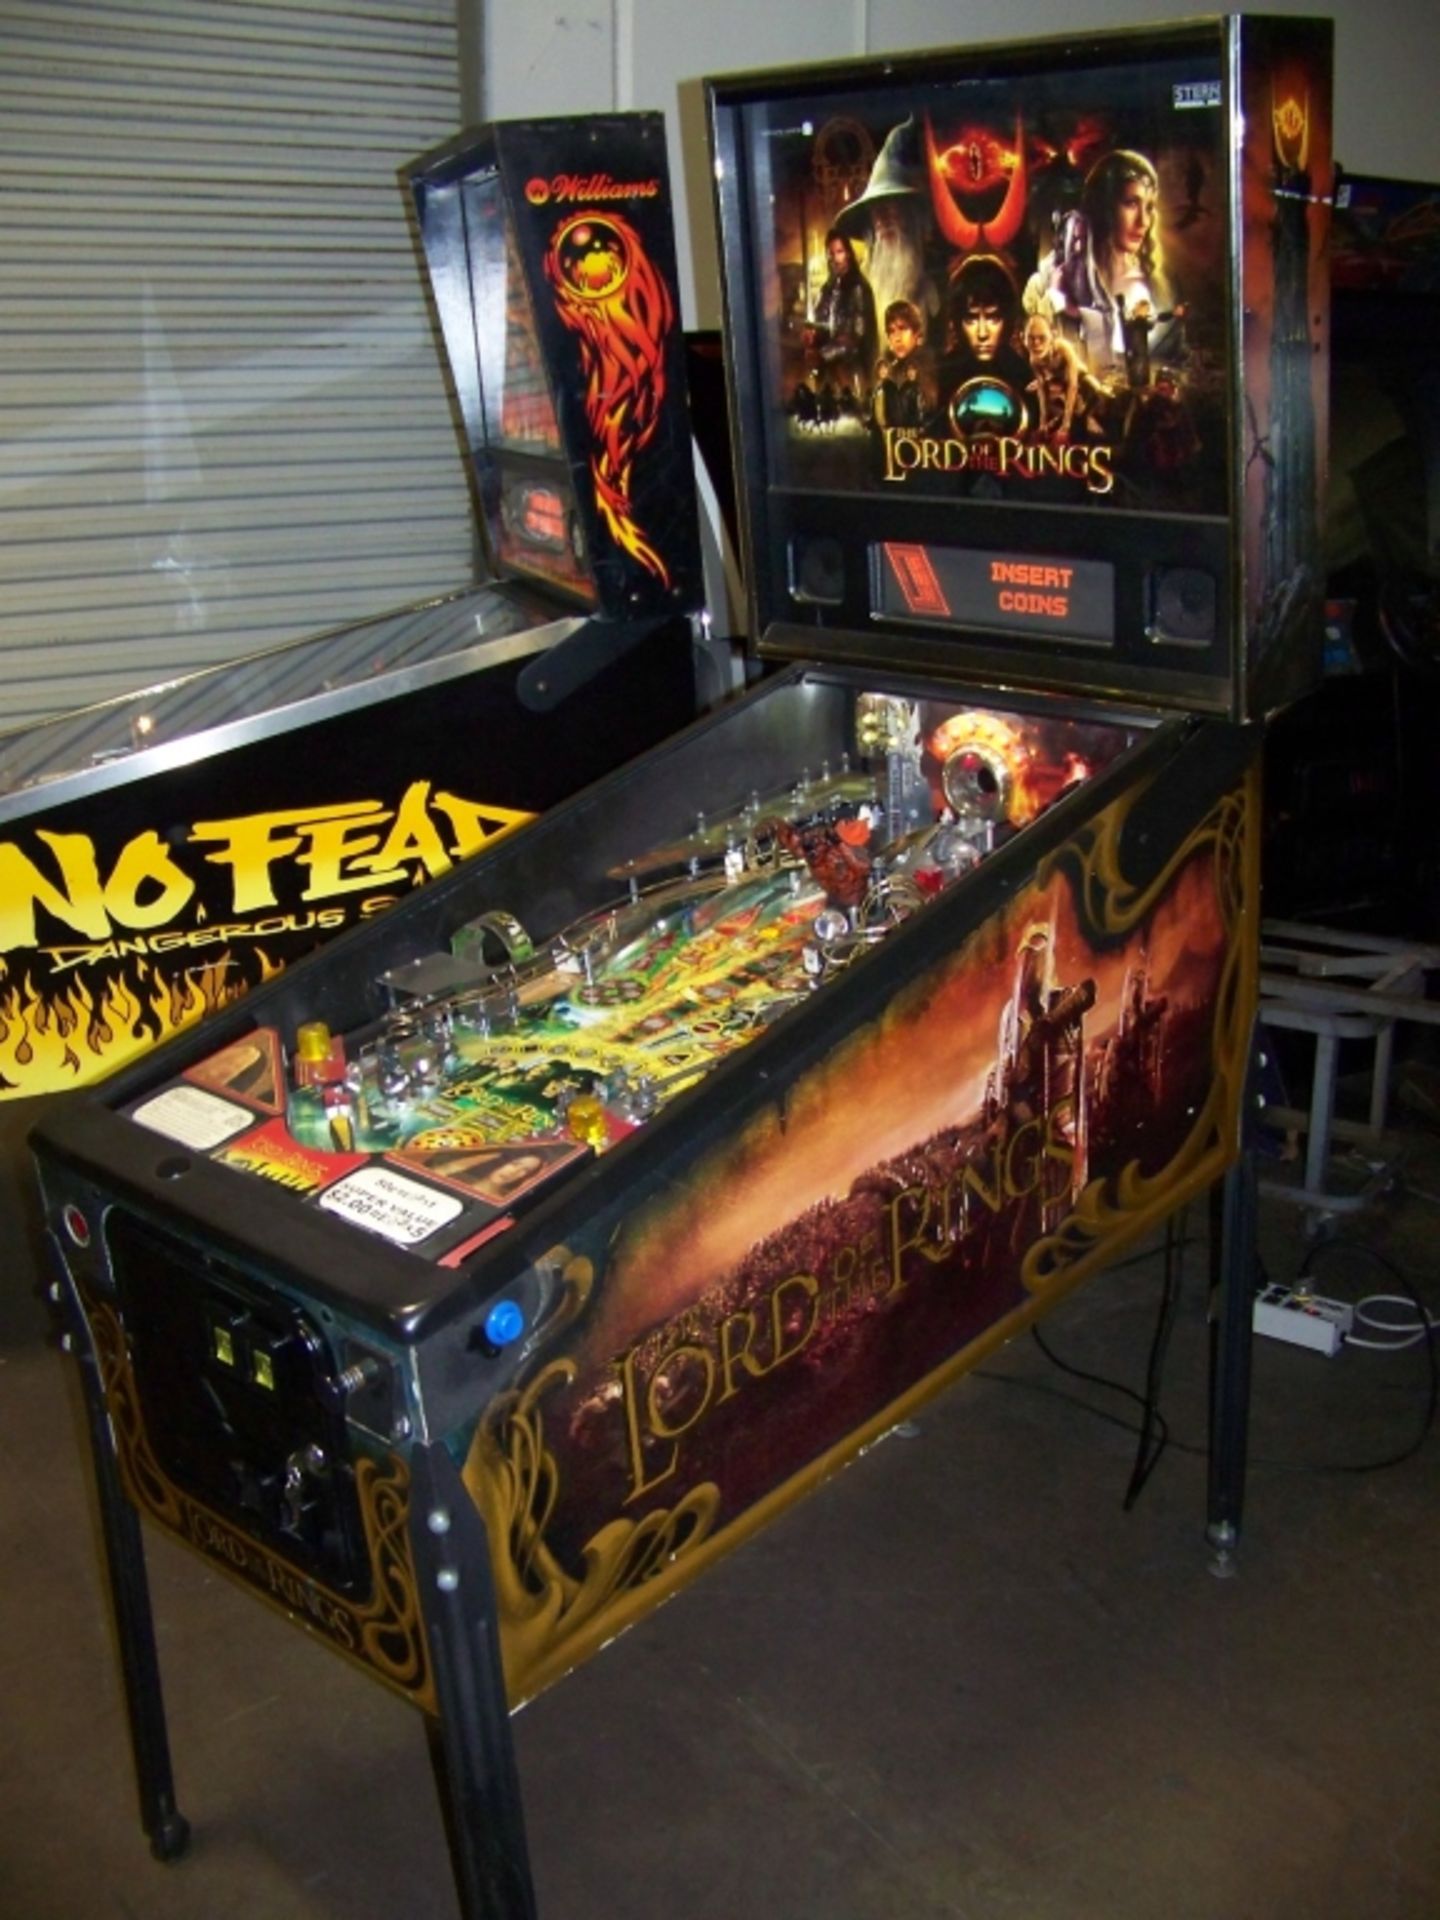 LORD OF THE RINGS PINBALL MACHINE STERN Item is in used condition. Evidence of wear and commercial - Image 2 of 10